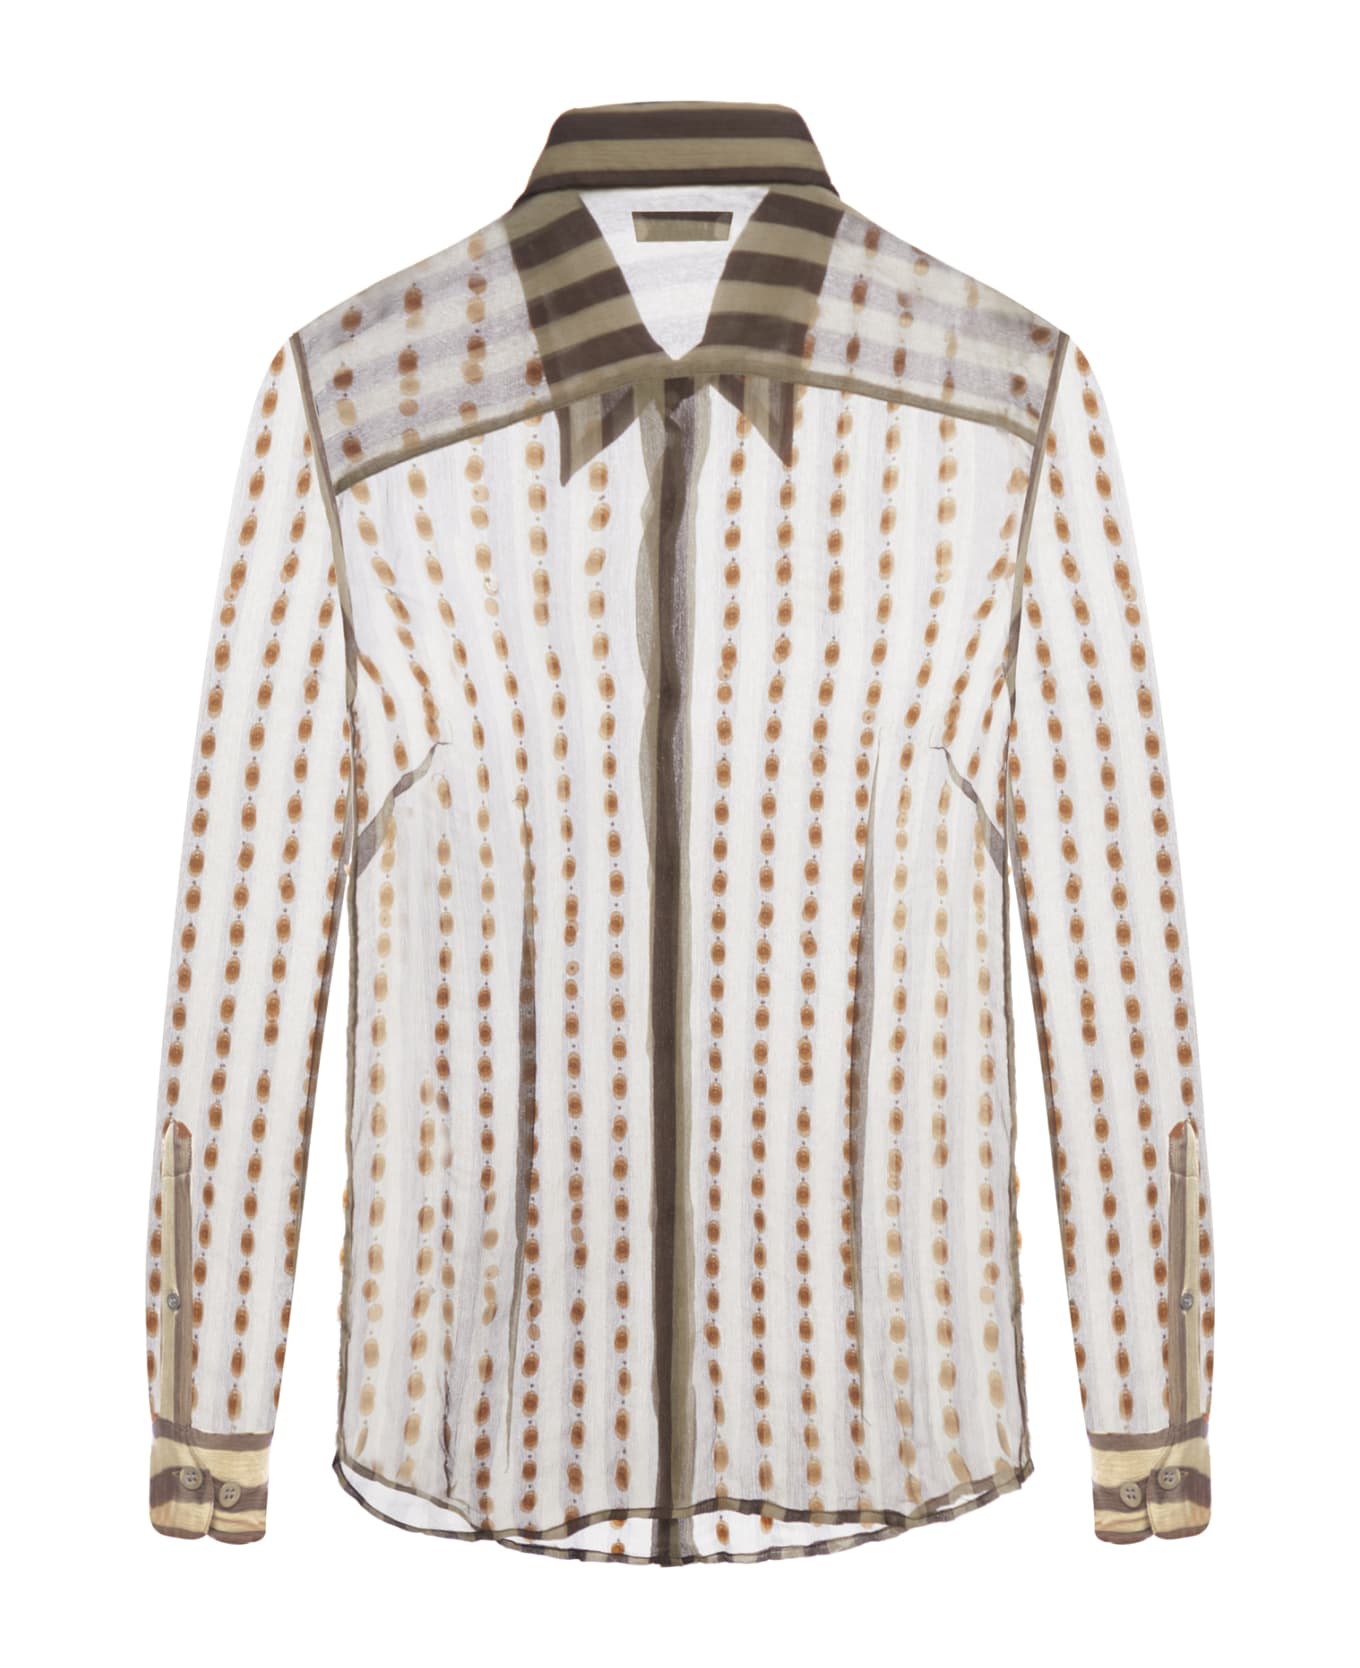 Dries Van Noten 00810-chowy Emb 8105 W.w.shirt Silk Mousseline Printed With Bicolor Stripes - Brown